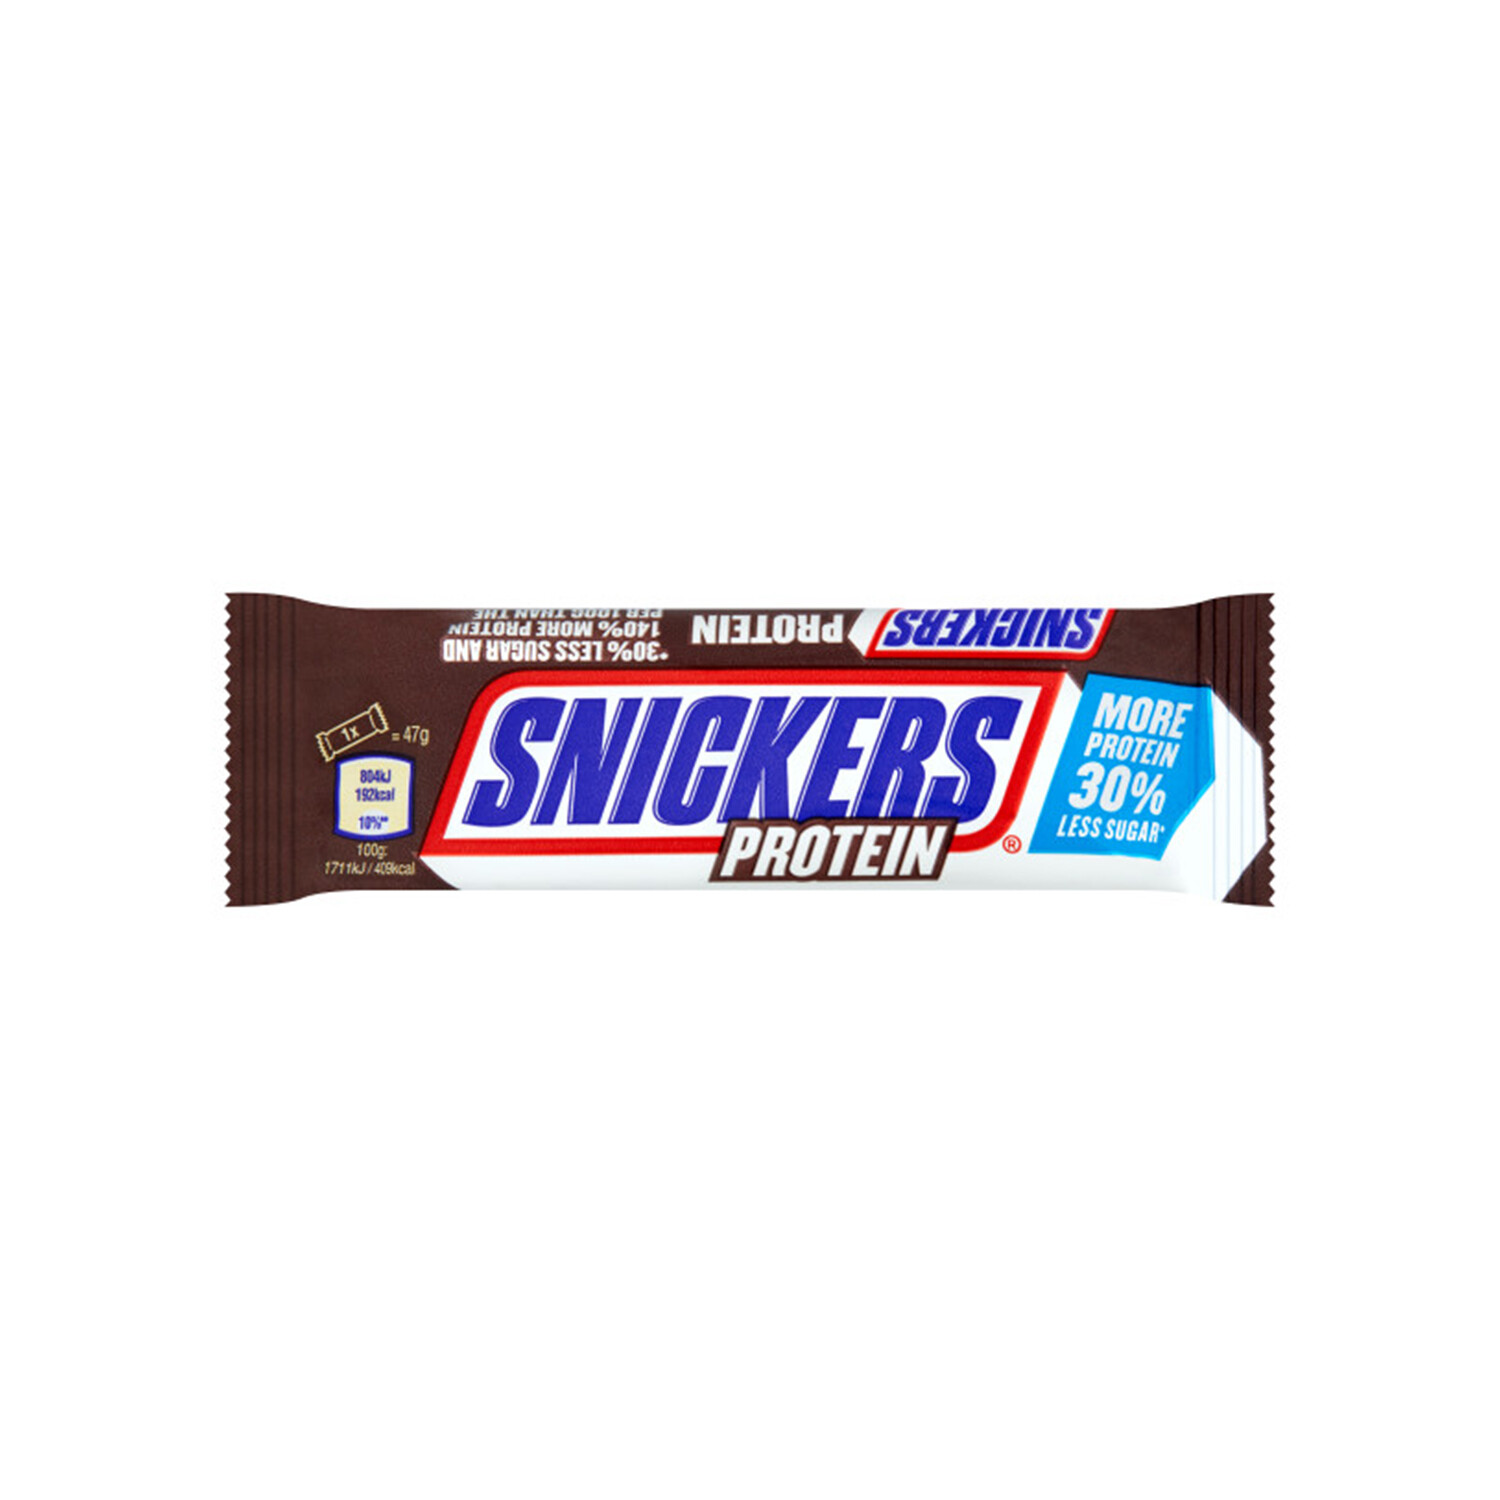 Snickers Protein Bar Image